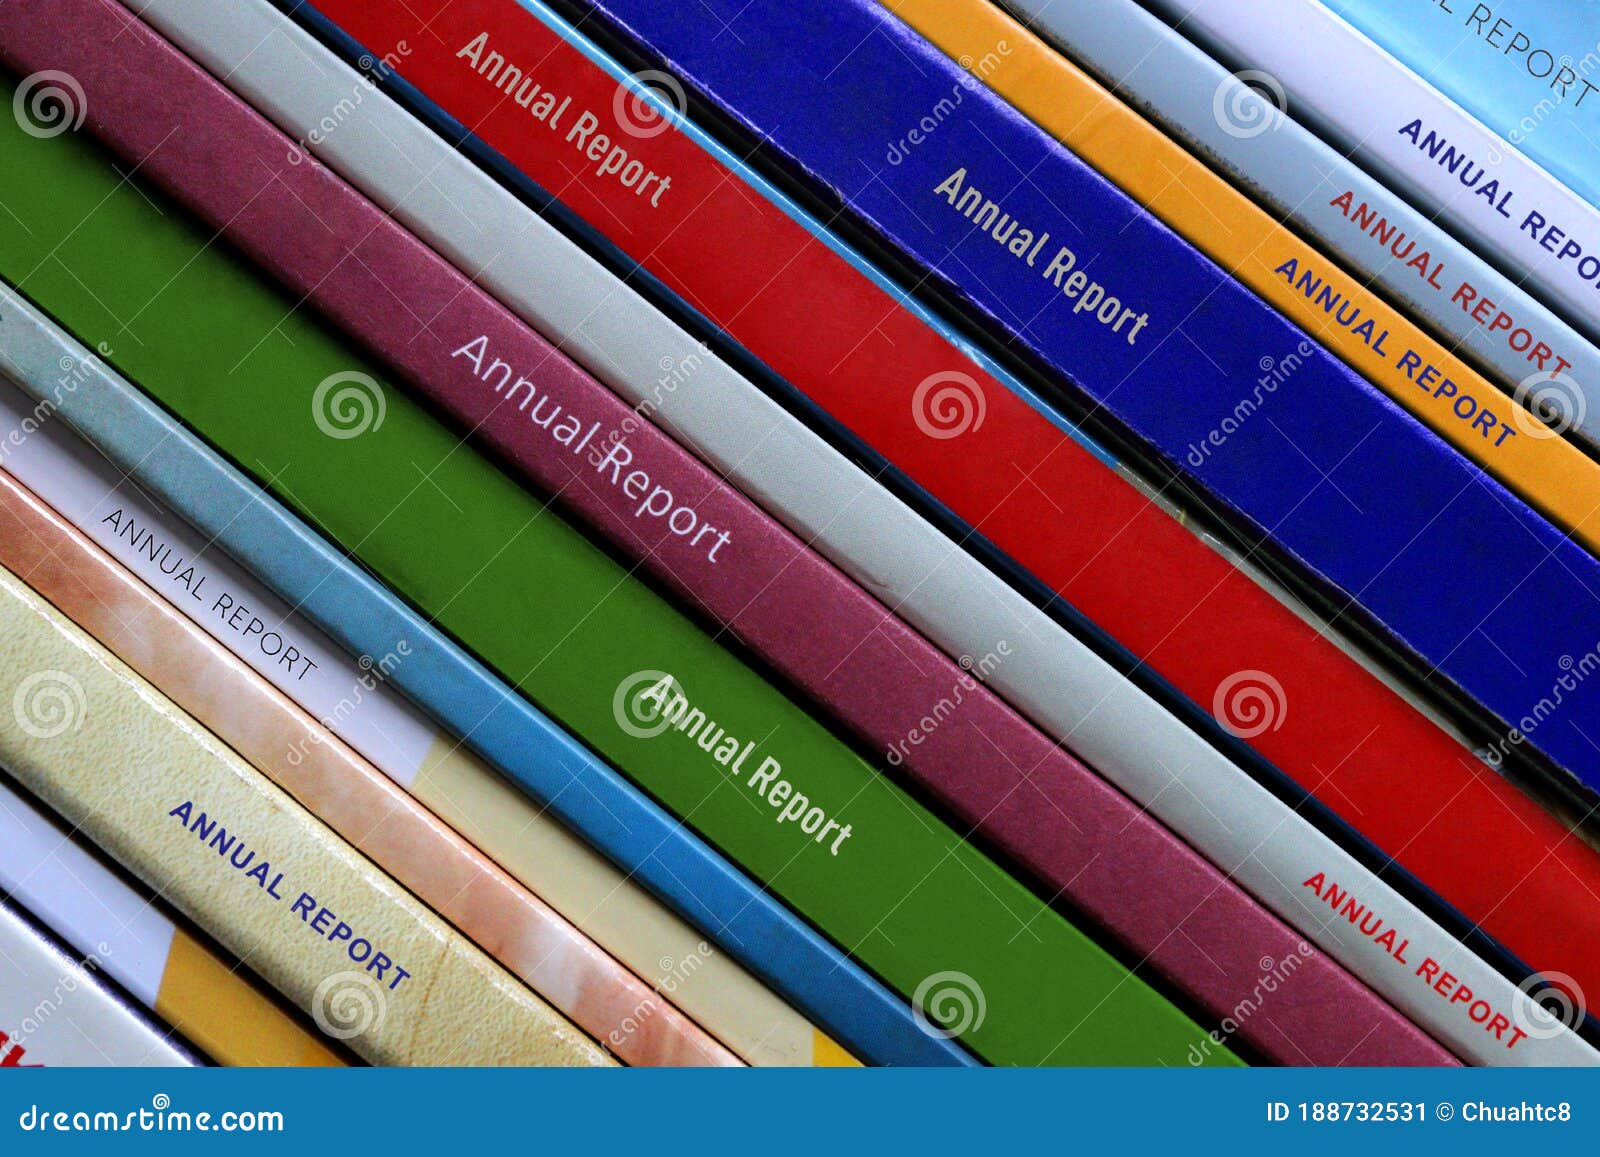 close-up on the spines of a set of corporate annual reports